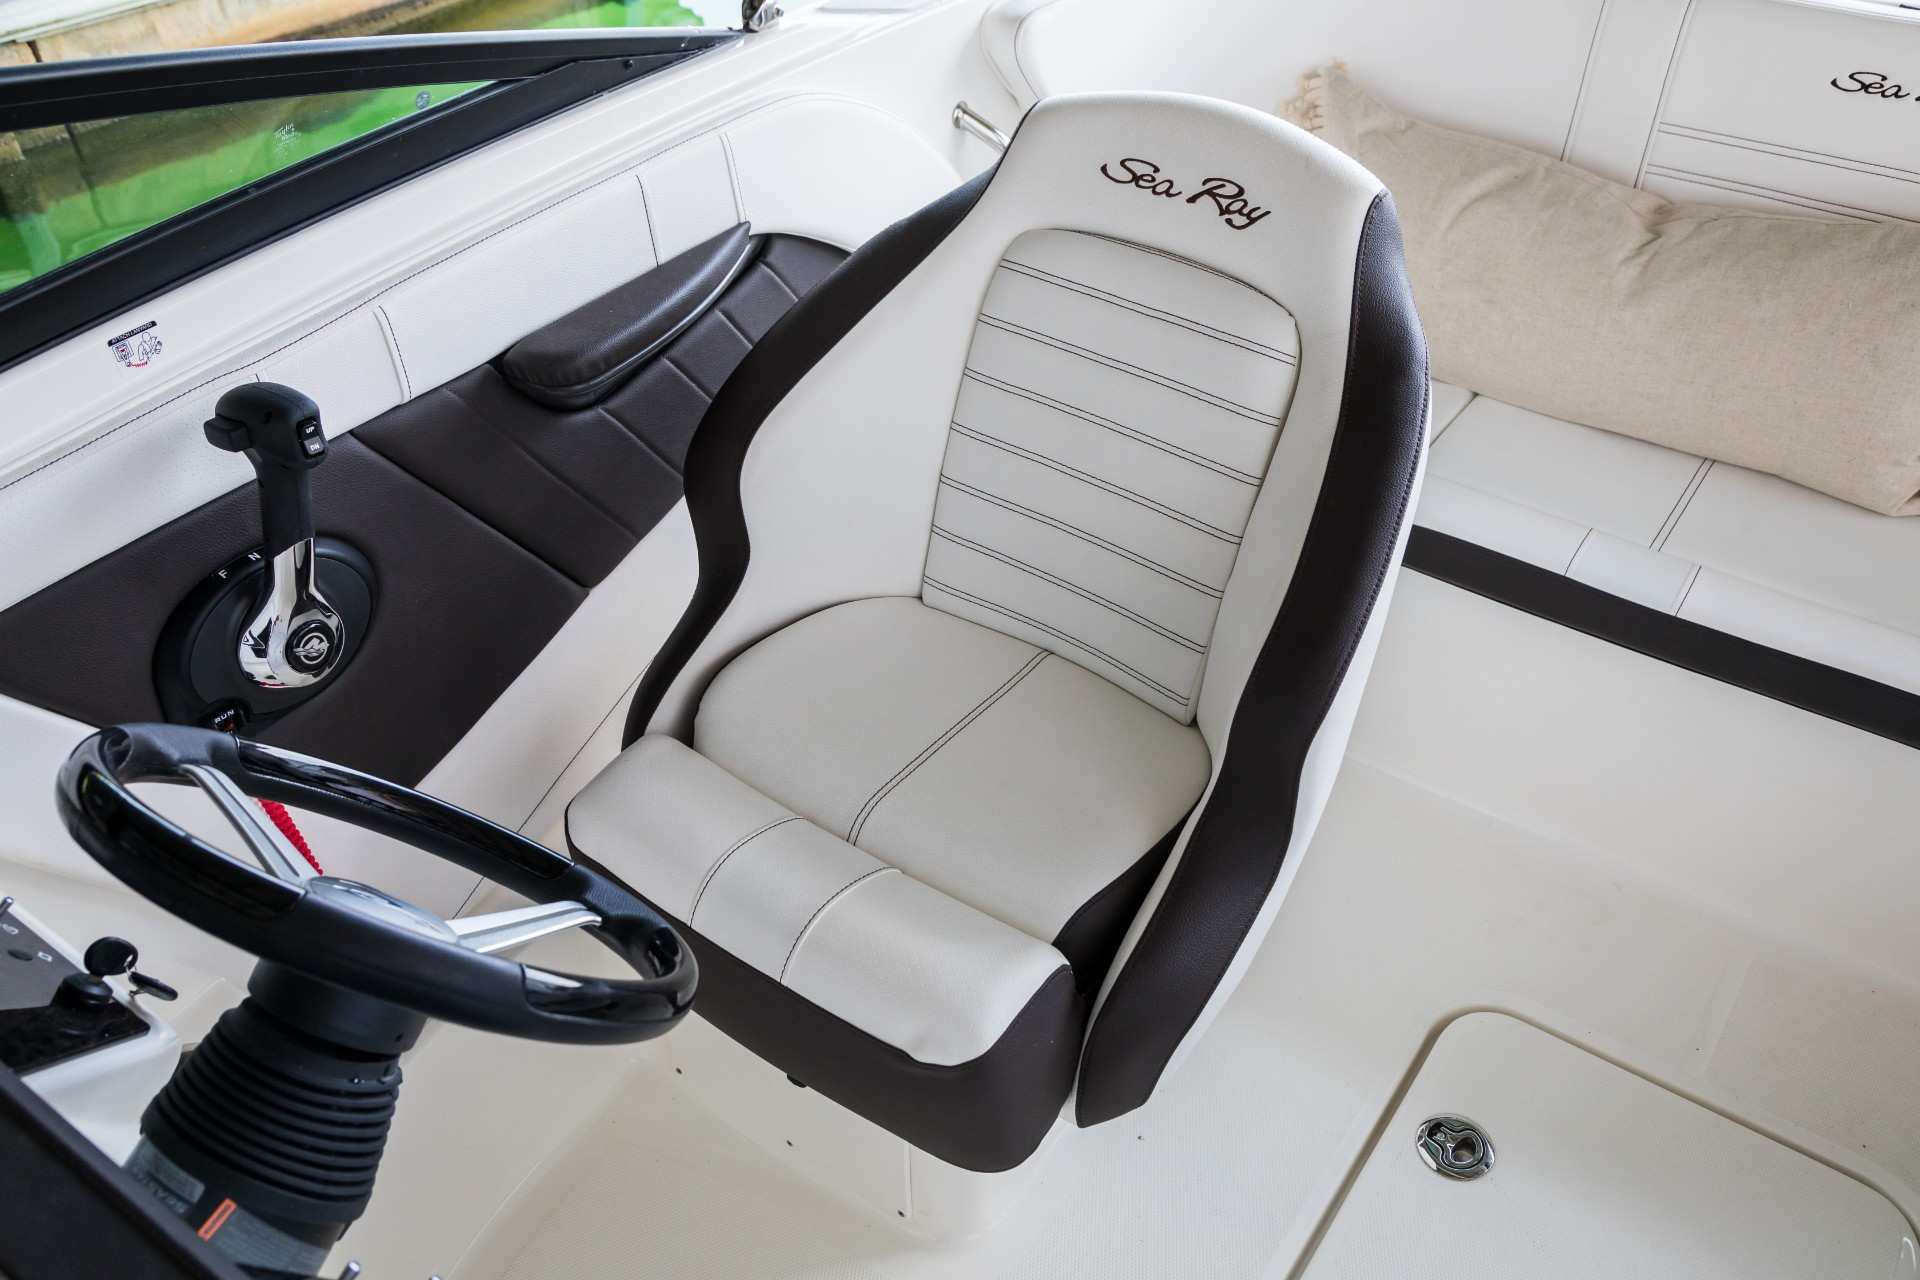 SPX 190 Outboard helm seat